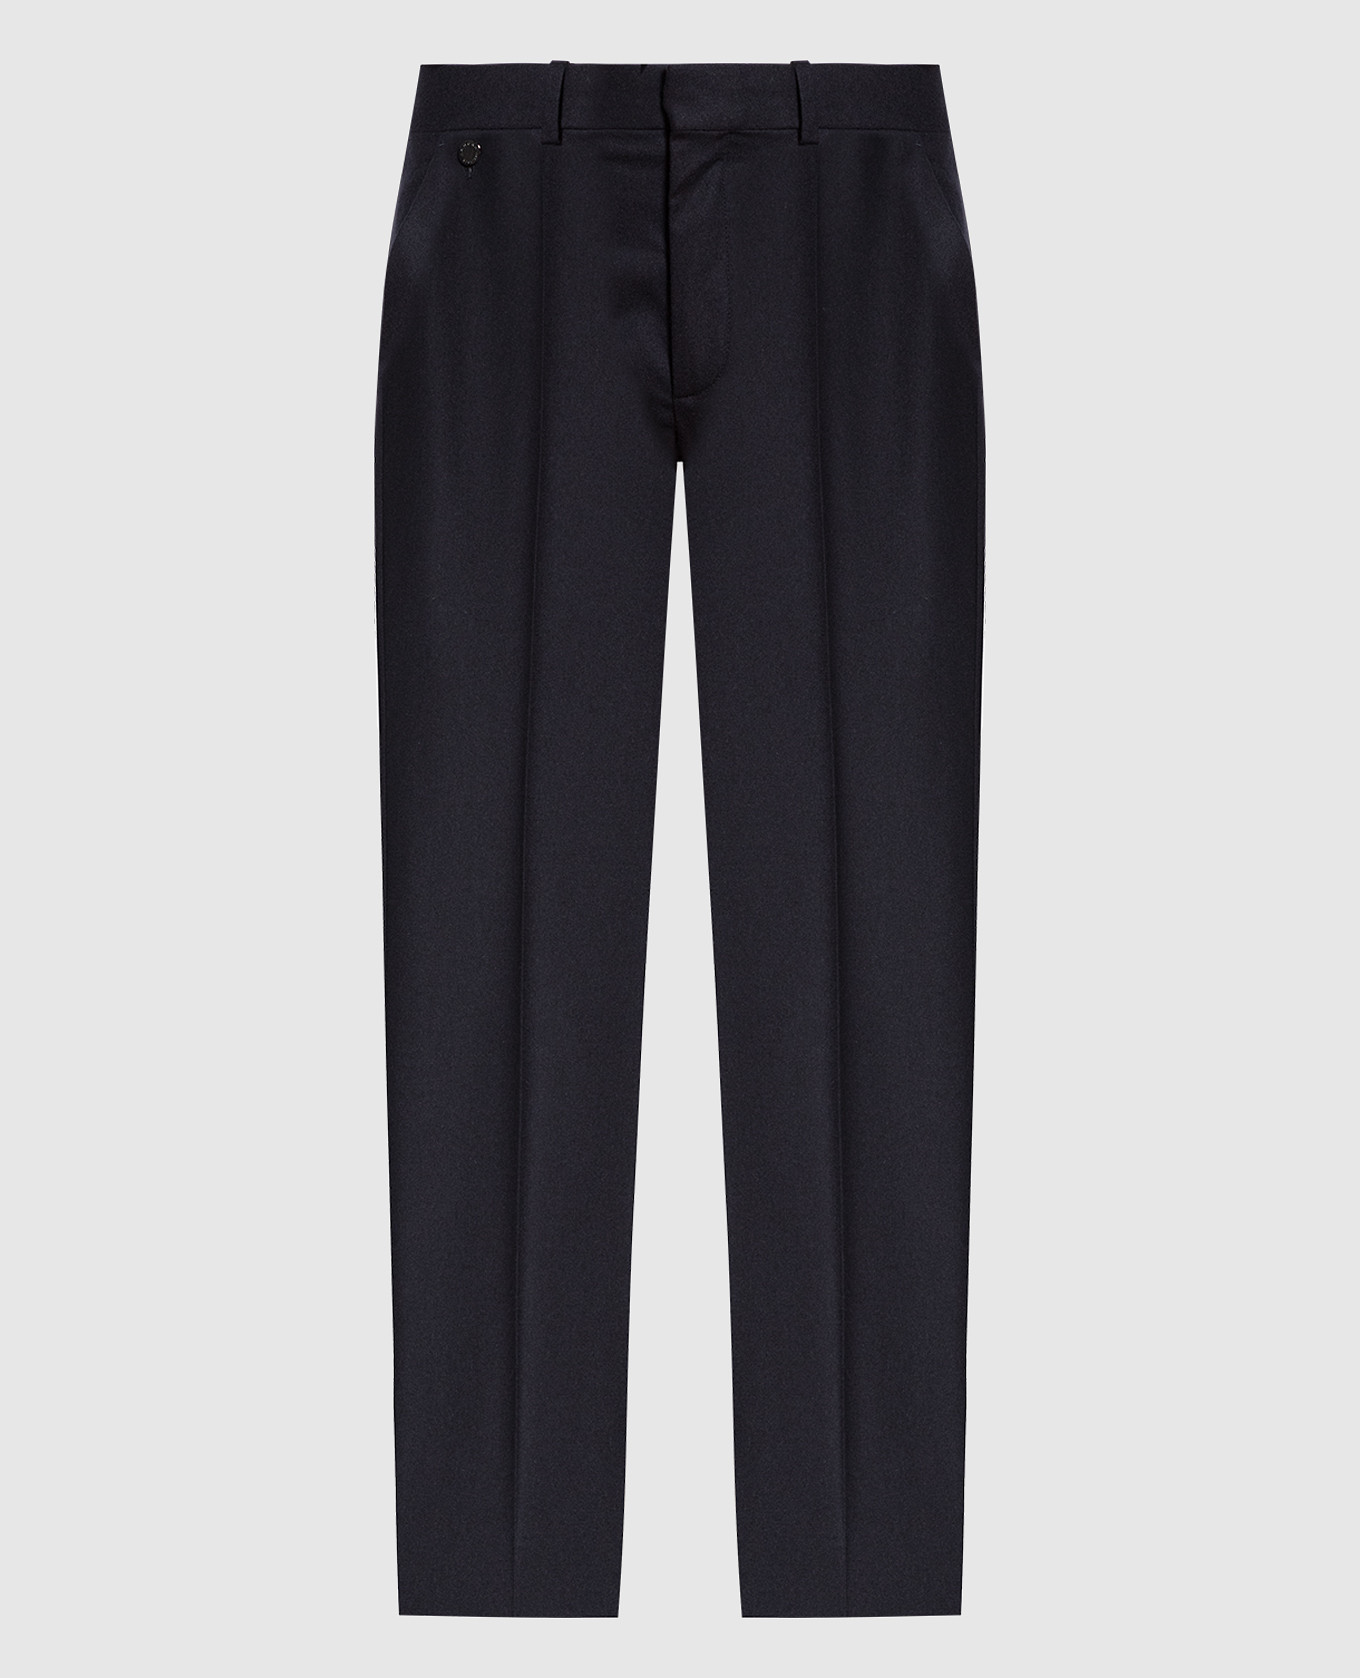 Blue wool and cashmere pants